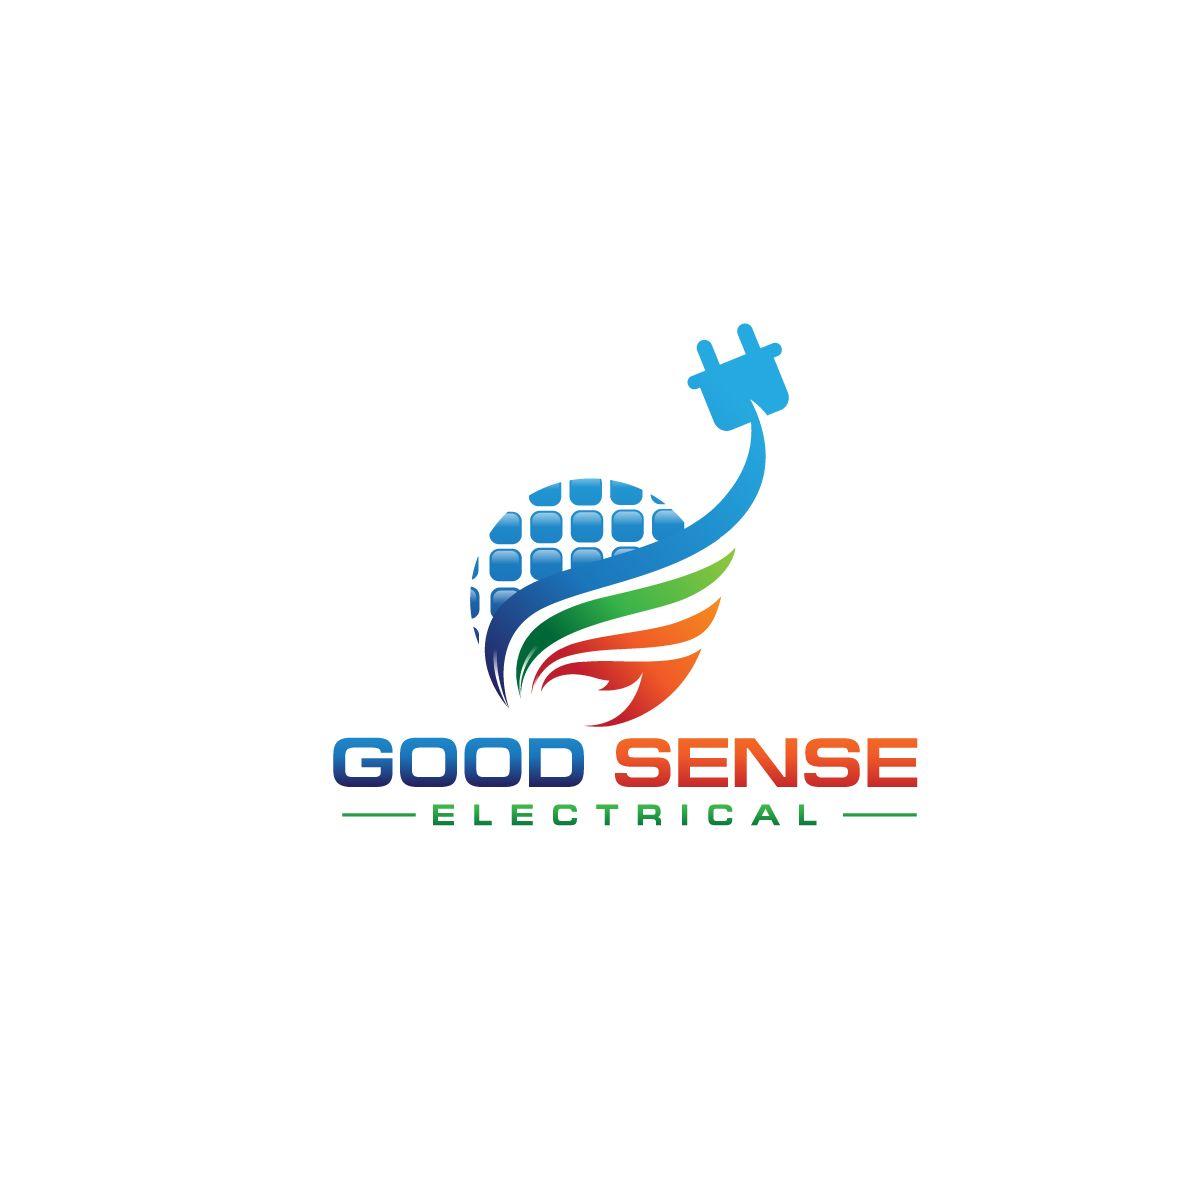 Electrical Graphics Logo - Serious, Modern, Electrical Logo Design for Good Sense Electrical by ...